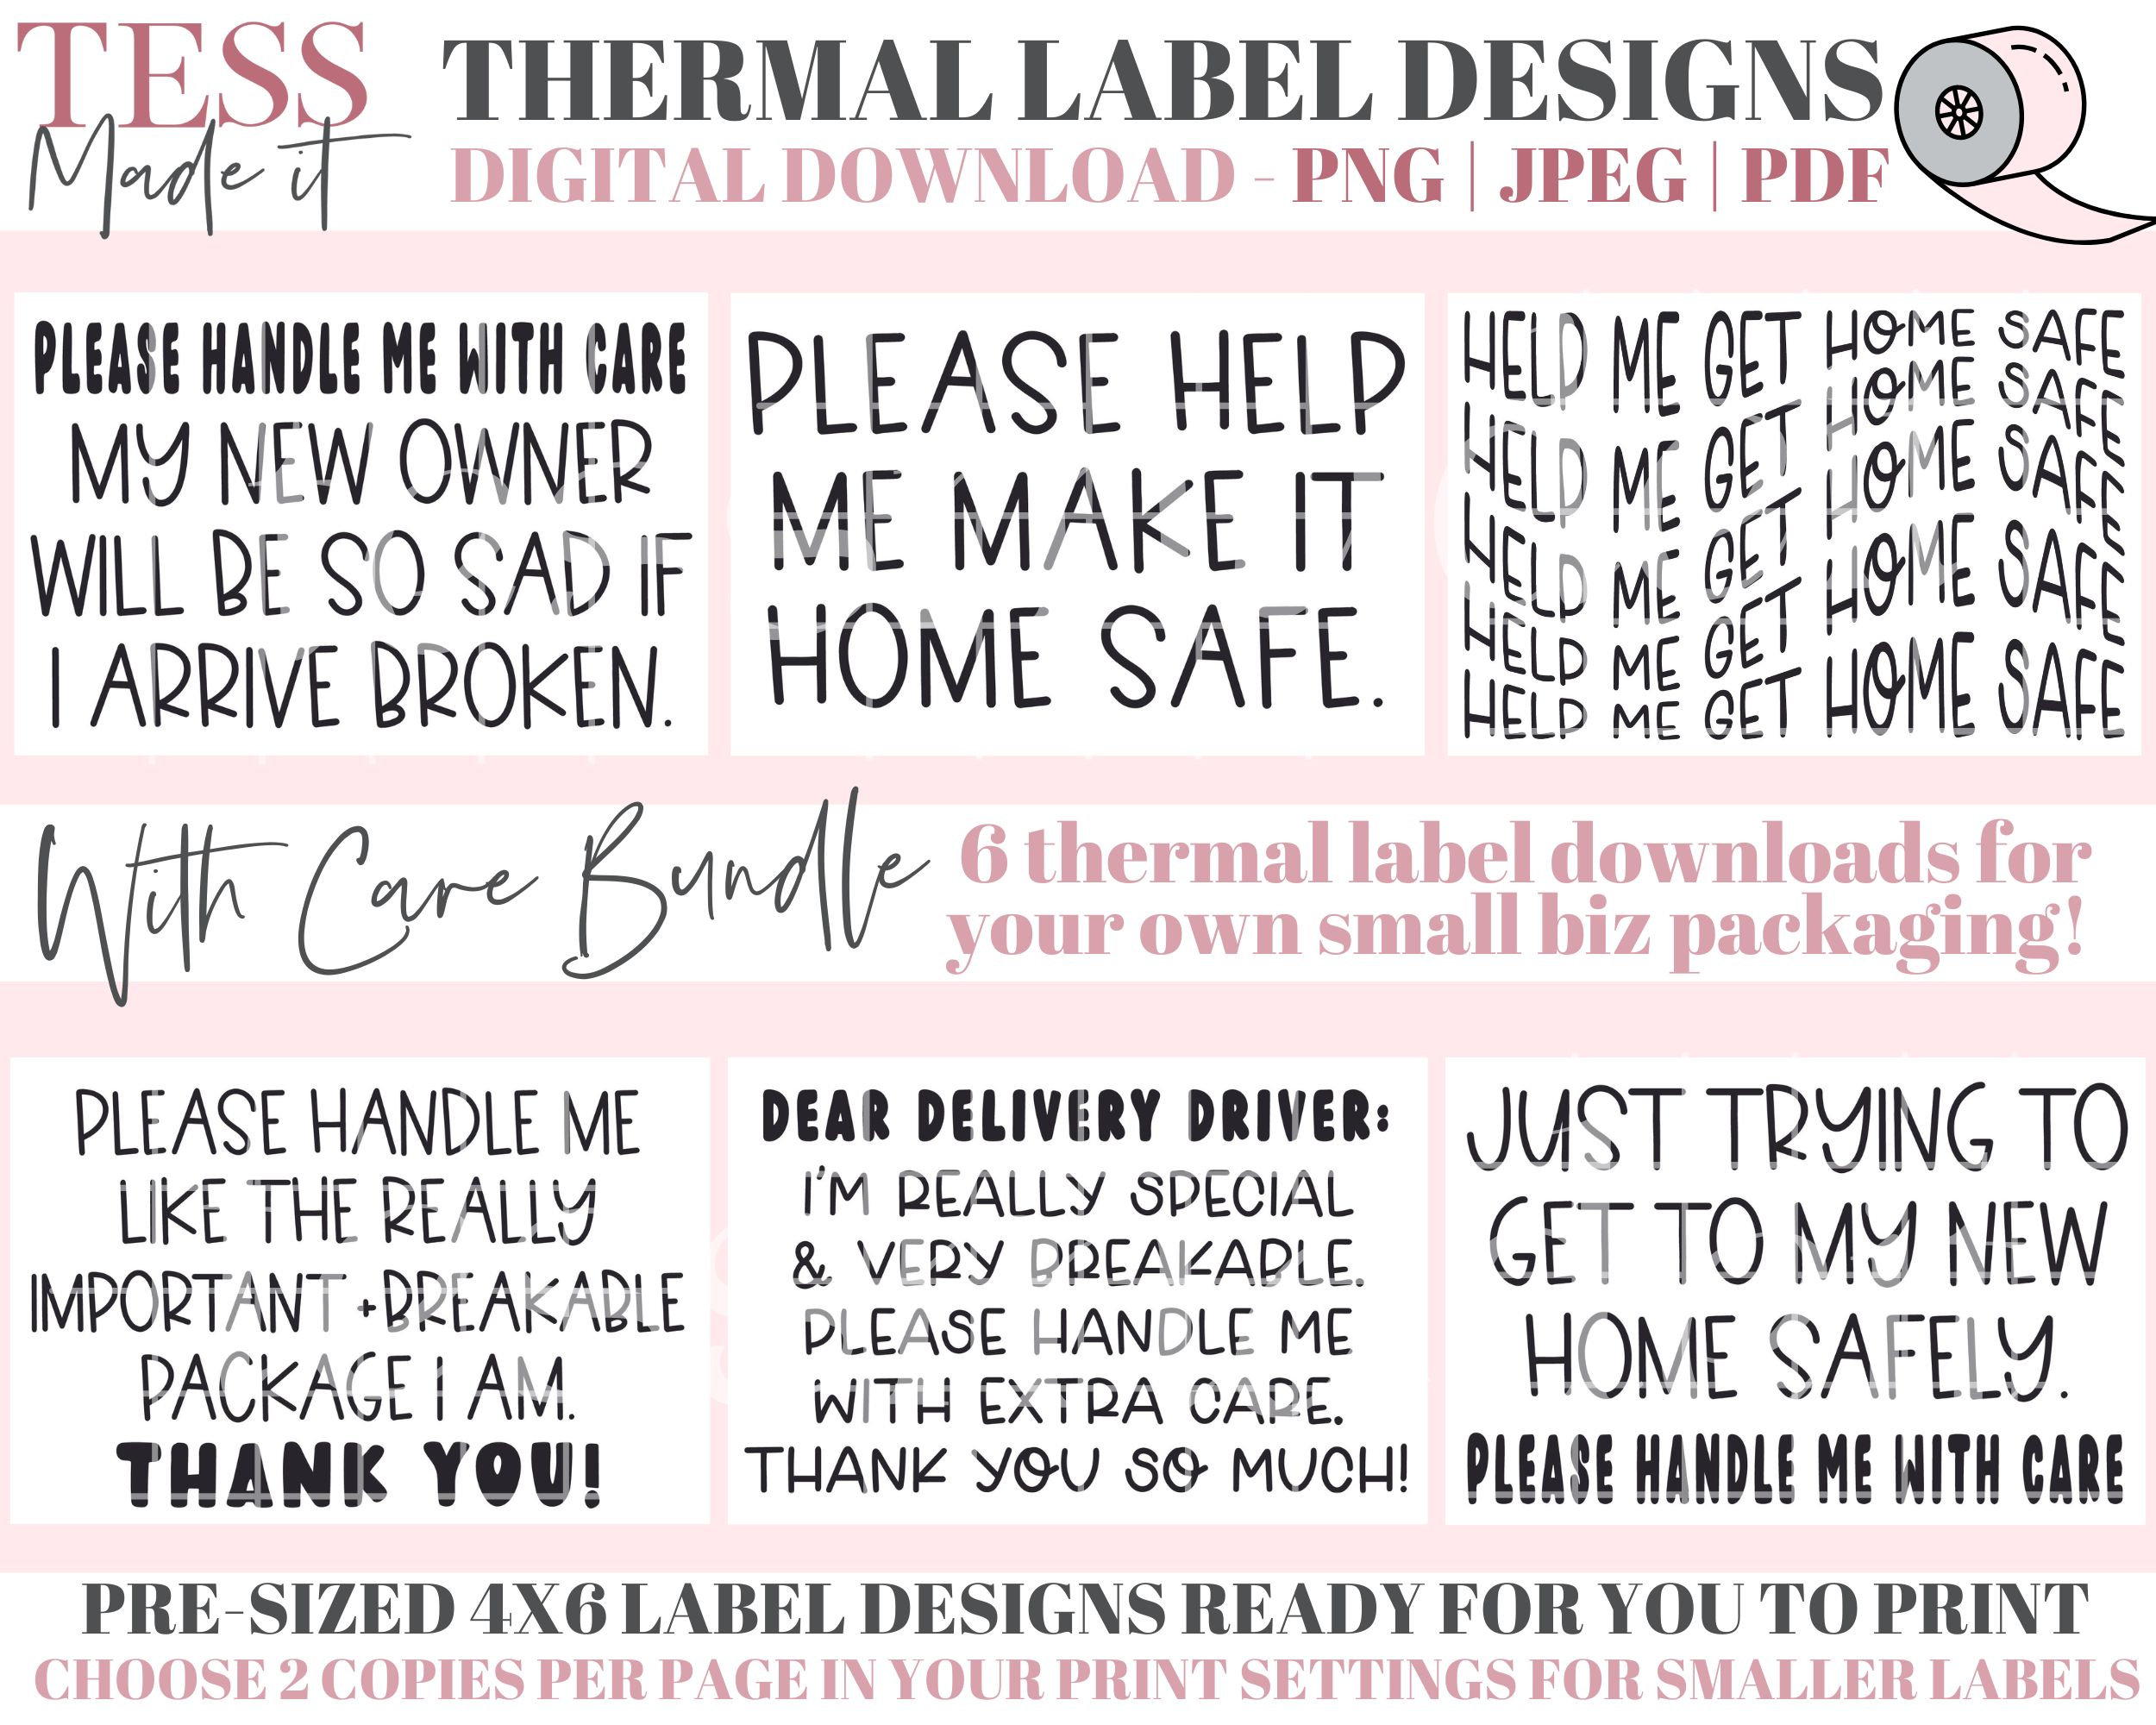 Clothing Label Stamp, All-in-one Logo With Care Instructions Label